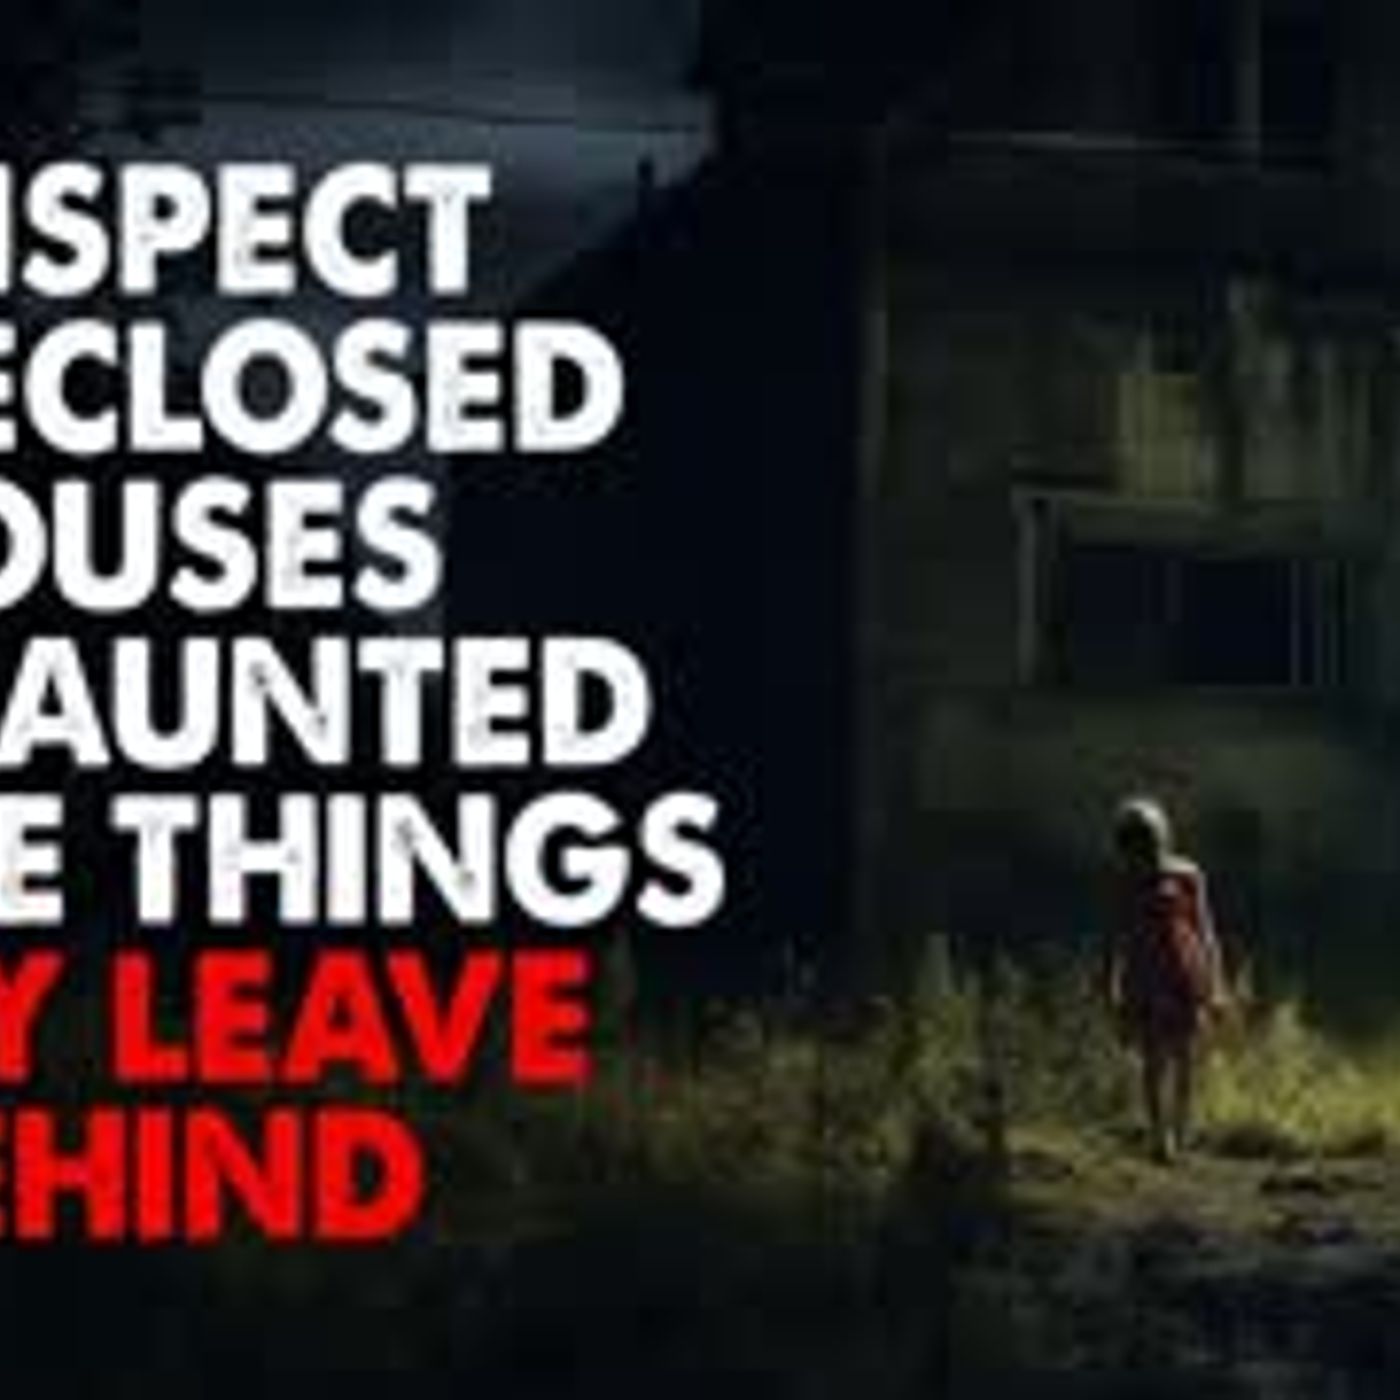 "I inspect foreclosed houses. I’m haunted by the things people leave behind" Creepypasta